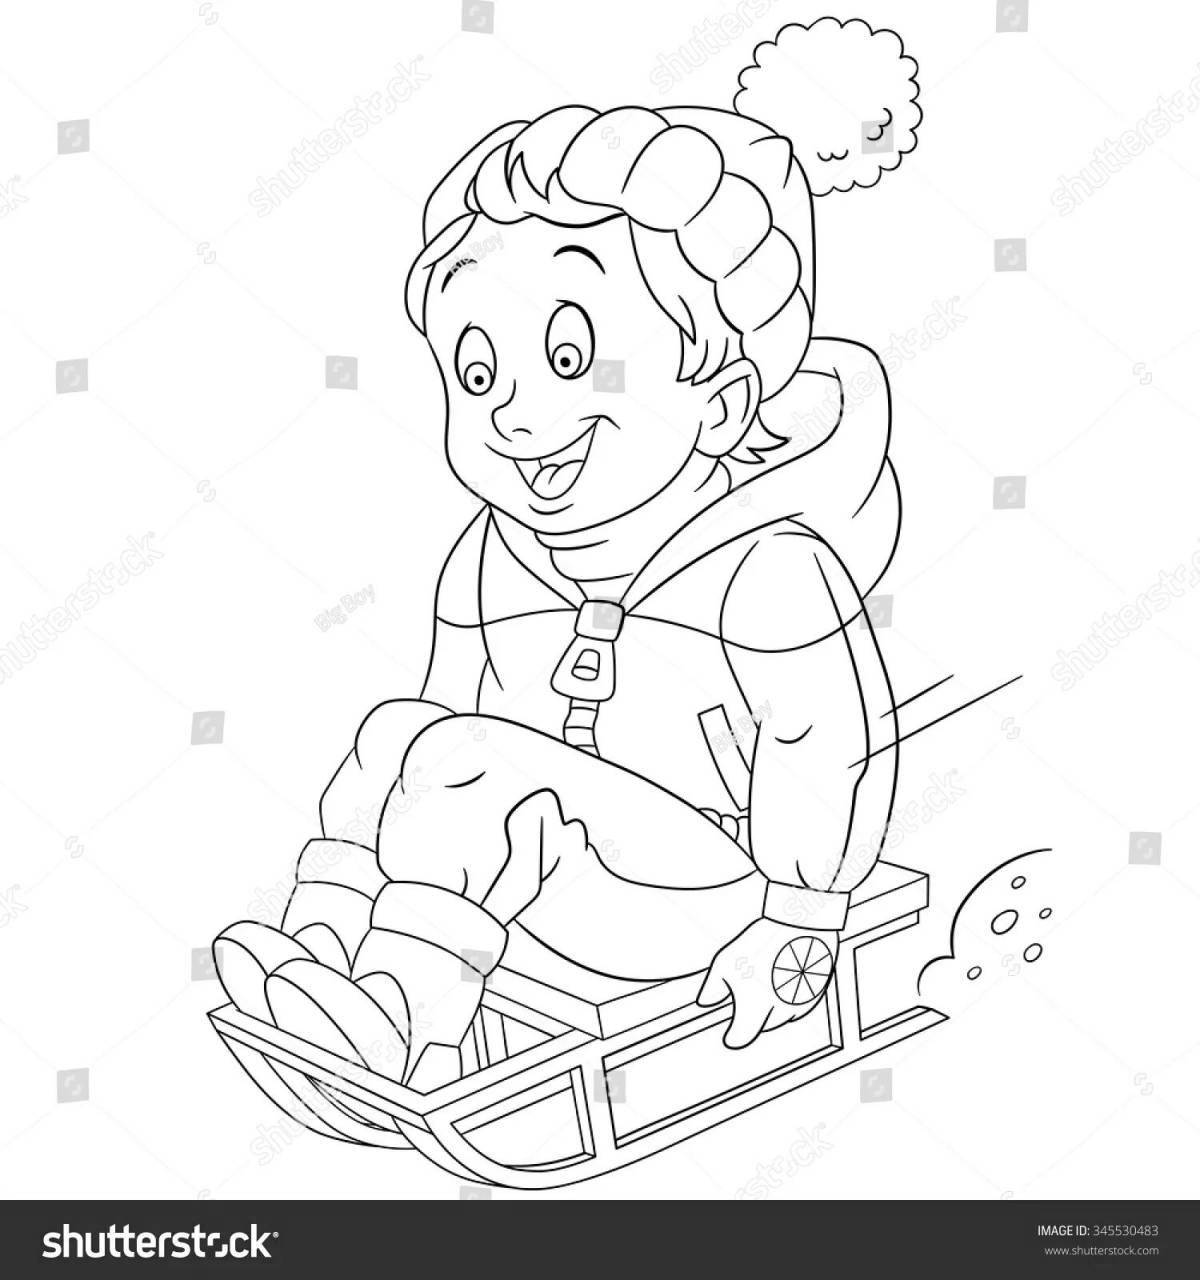 Live coloring on a sleigh